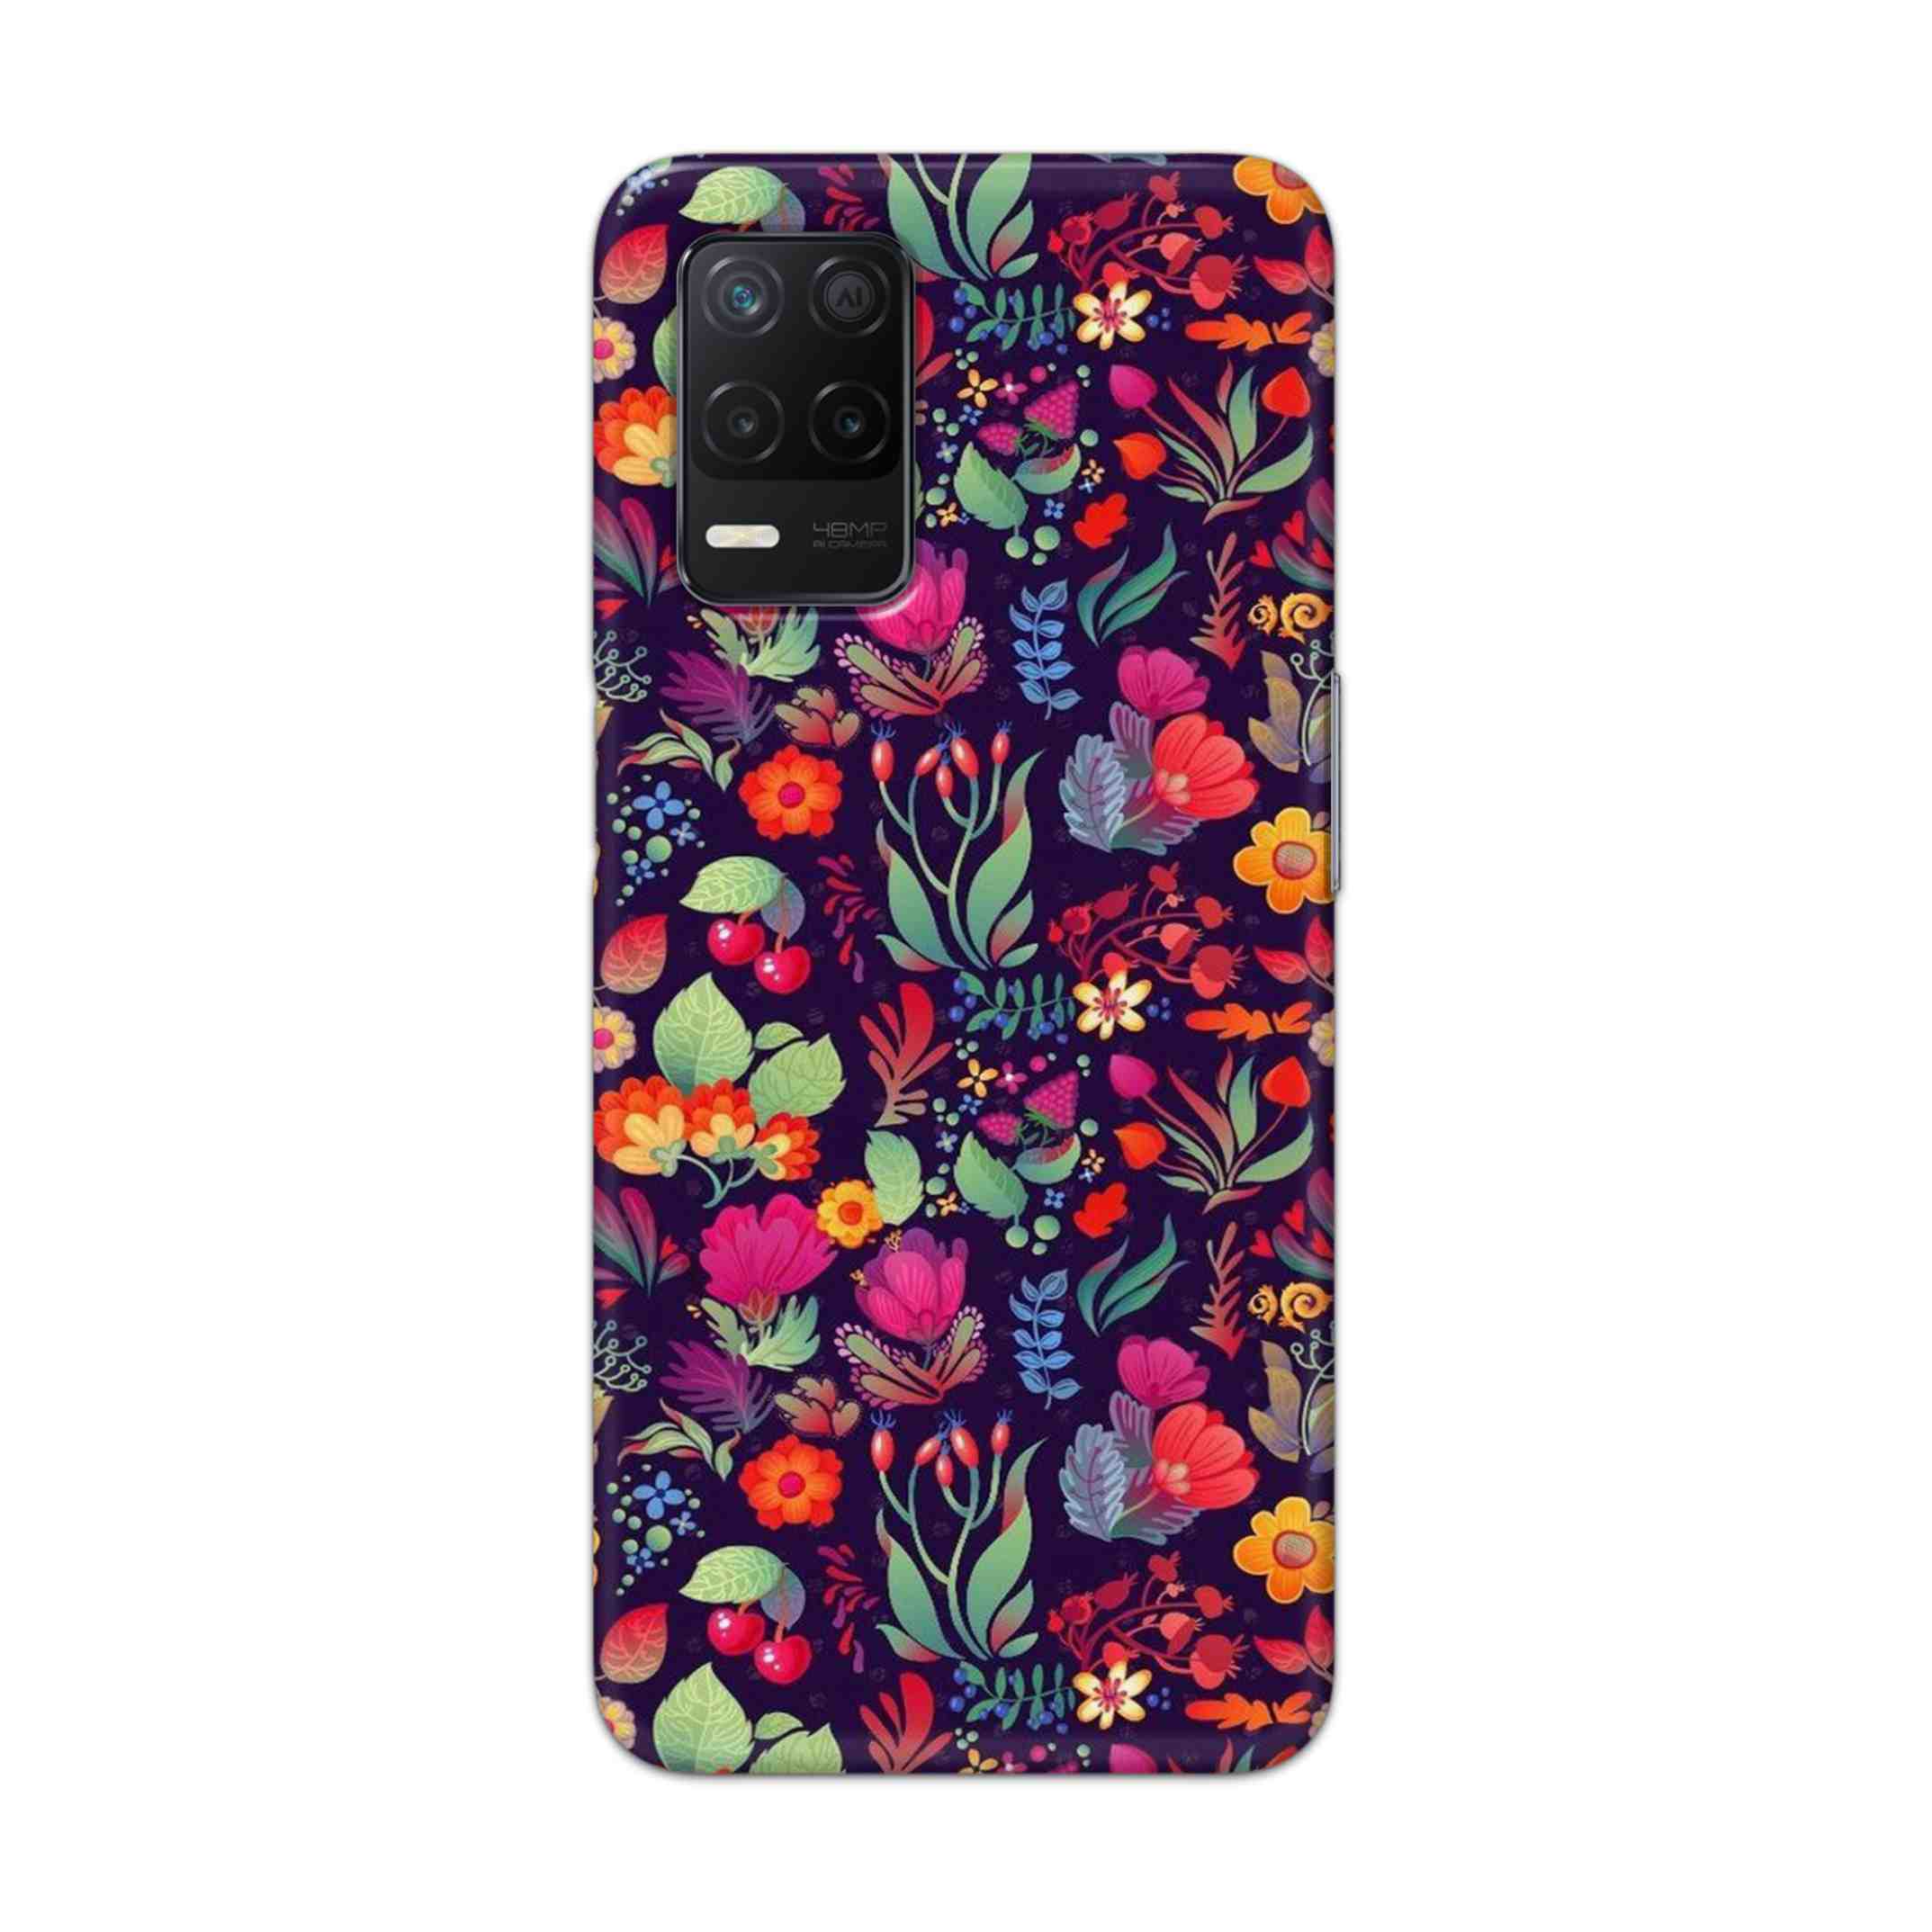 Buy Fruits Flower Hard Back Mobile Phone Case Cover For Realme Narzo 30 5G Online